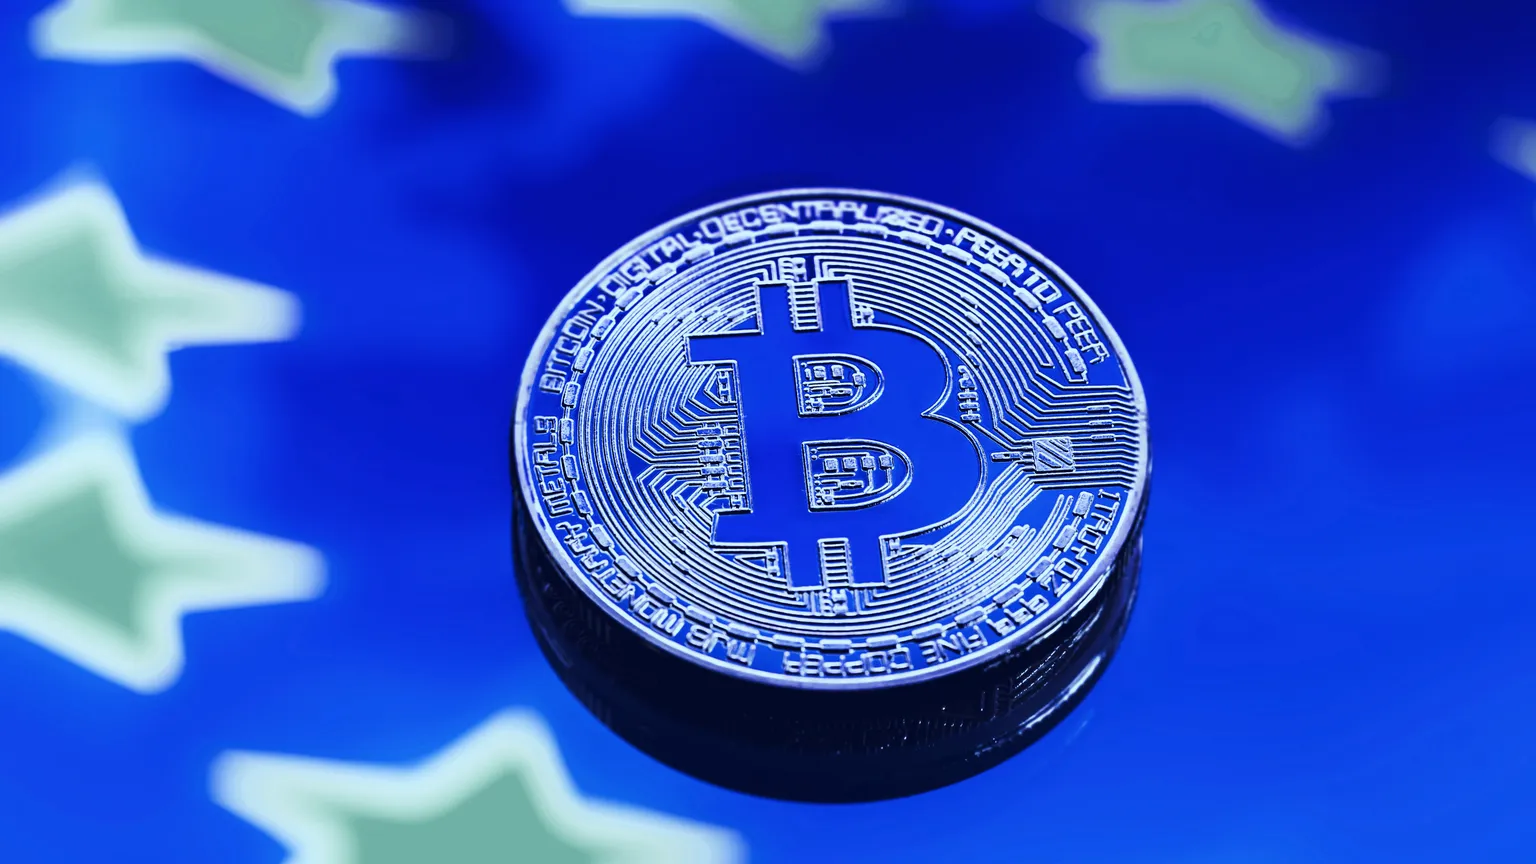 Throughout Europe, confidence in cryptocurrencies has increased by 3%. IMAGE: Shutterstock